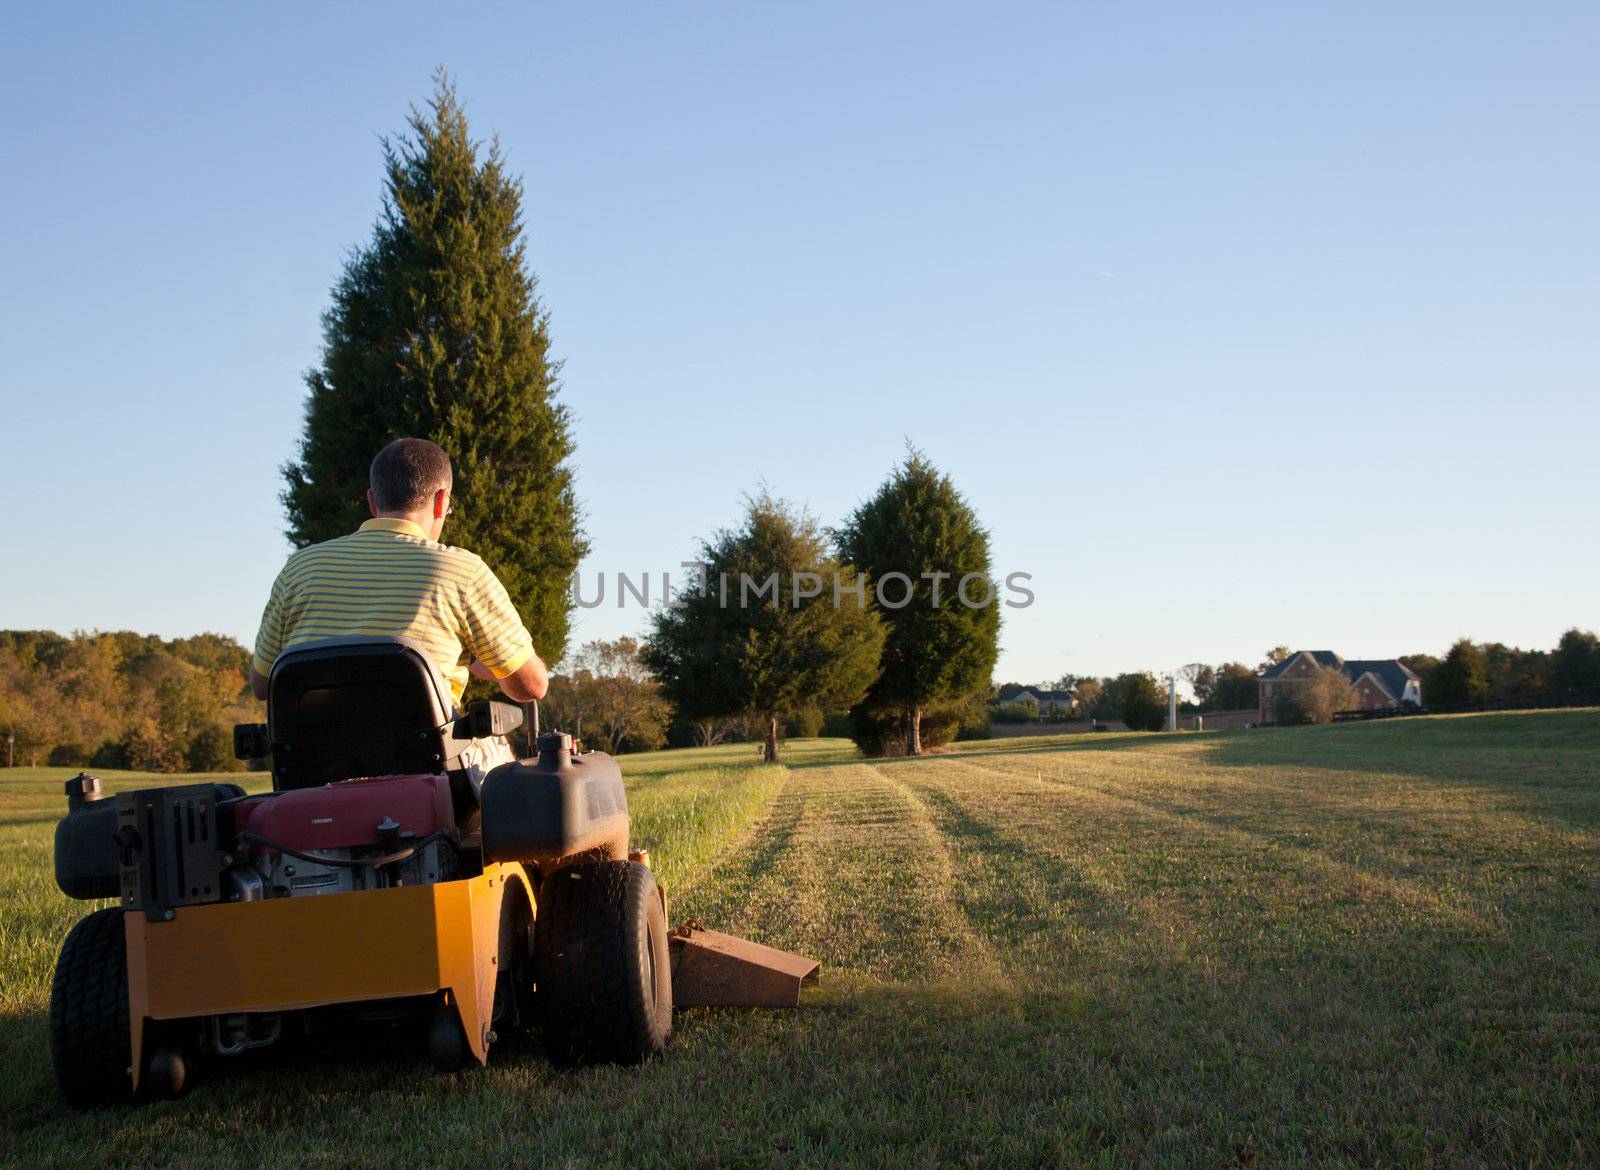 Middle aged man on zero turn mower cutting grass on a sunny day with the sun low in the sky